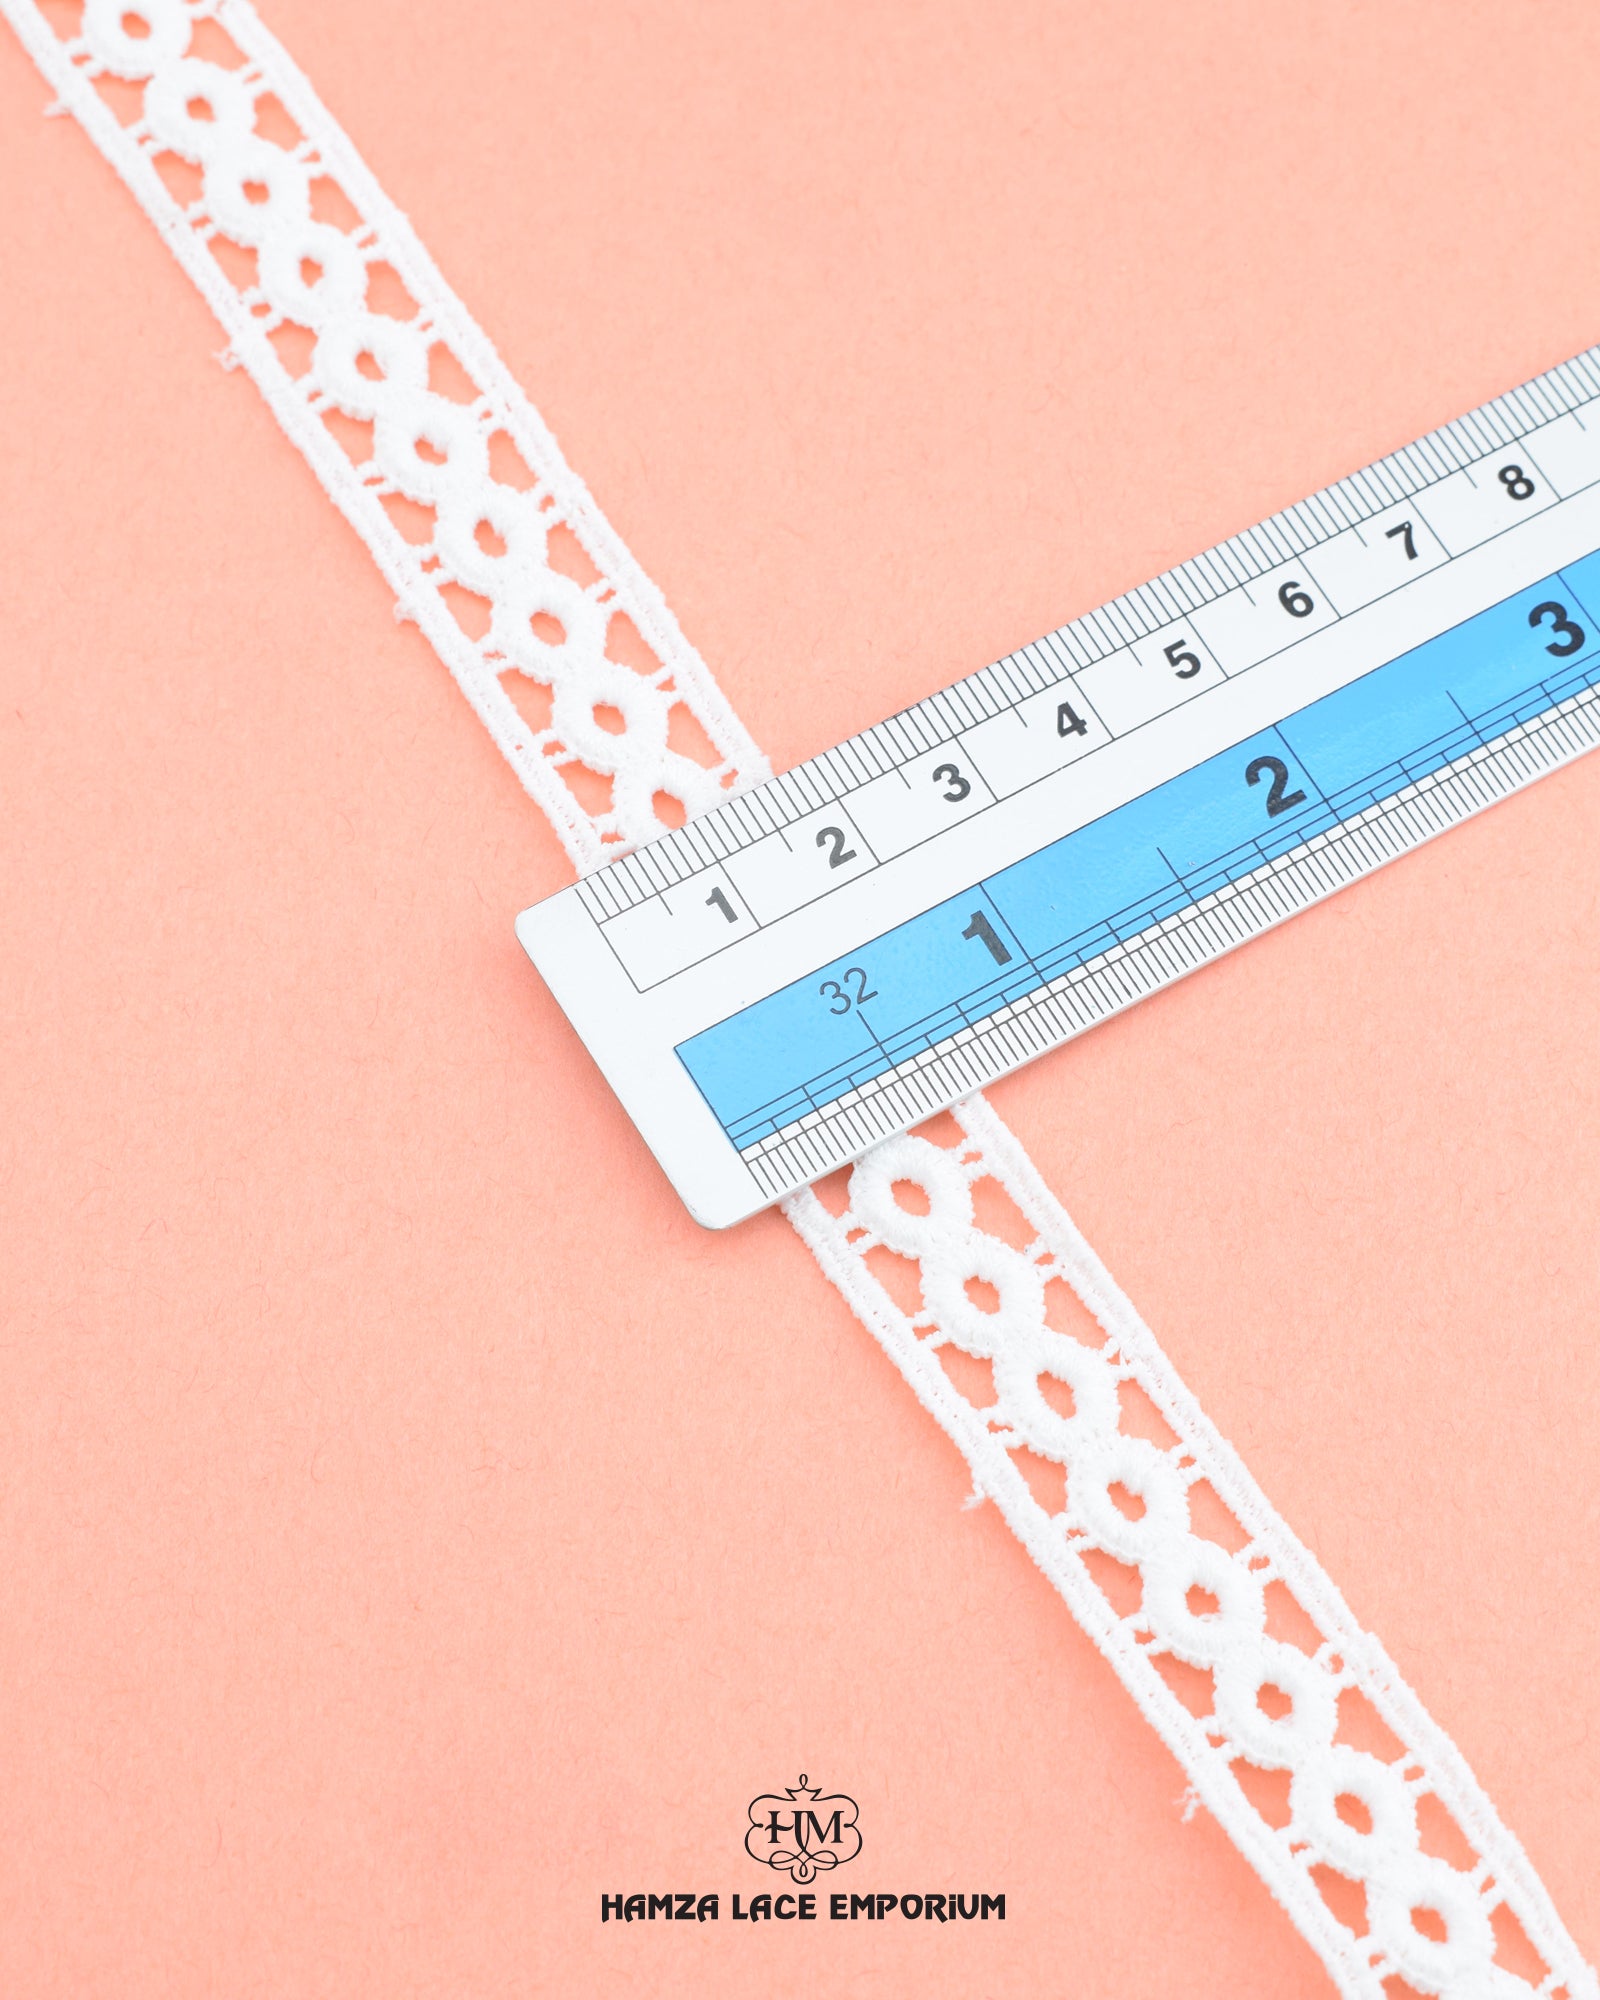 The size of the 'Center Filling Lace 1109' is given as '0.75' inches by placing a ruler on it